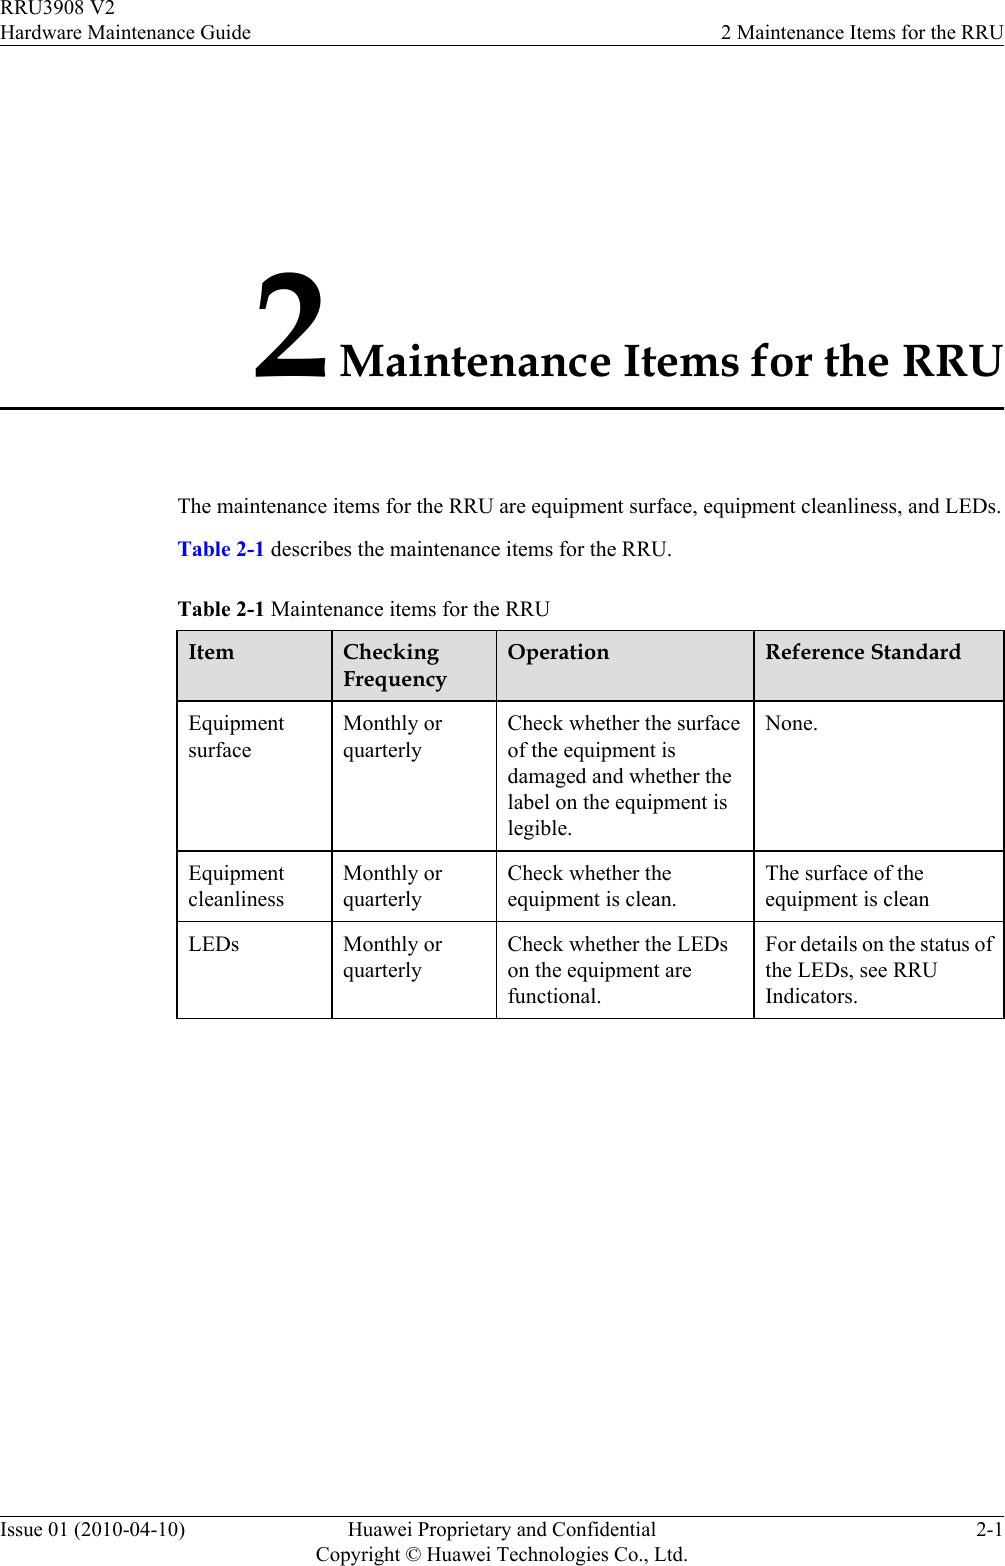 2 Maintenance Items for the RRUThe maintenance items for the RRU are equipment surface, equipment cleanliness, and LEDs.Table 2-1 describes the maintenance items for the RRU.Table 2-1 Maintenance items for the RRUItem CheckingFrequencyOperation Reference StandardEquipmentsurfaceMonthly orquarterlyCheck whether the surfaceof the equipment isdamaged and whether thelabel on the equipment islegible.None.EquipmentcleanlinessMonthly orquarterlyCheck whether theequipment is clean.The surface of theequipment is cleanLEDs Monthly orquarterlyCheck whether the LEDson the equipment arefunctional.For details on the status ofthe LEDs, see RRUIndicators.RRU3908 V2Hardware Maintenance Guide 2 Maintenance Items for the RRUIssue 01 (2010-04-10) Huawei Proprietary and ConfidentialCopyright © Huawei Technologies Co., Ltd.2-1